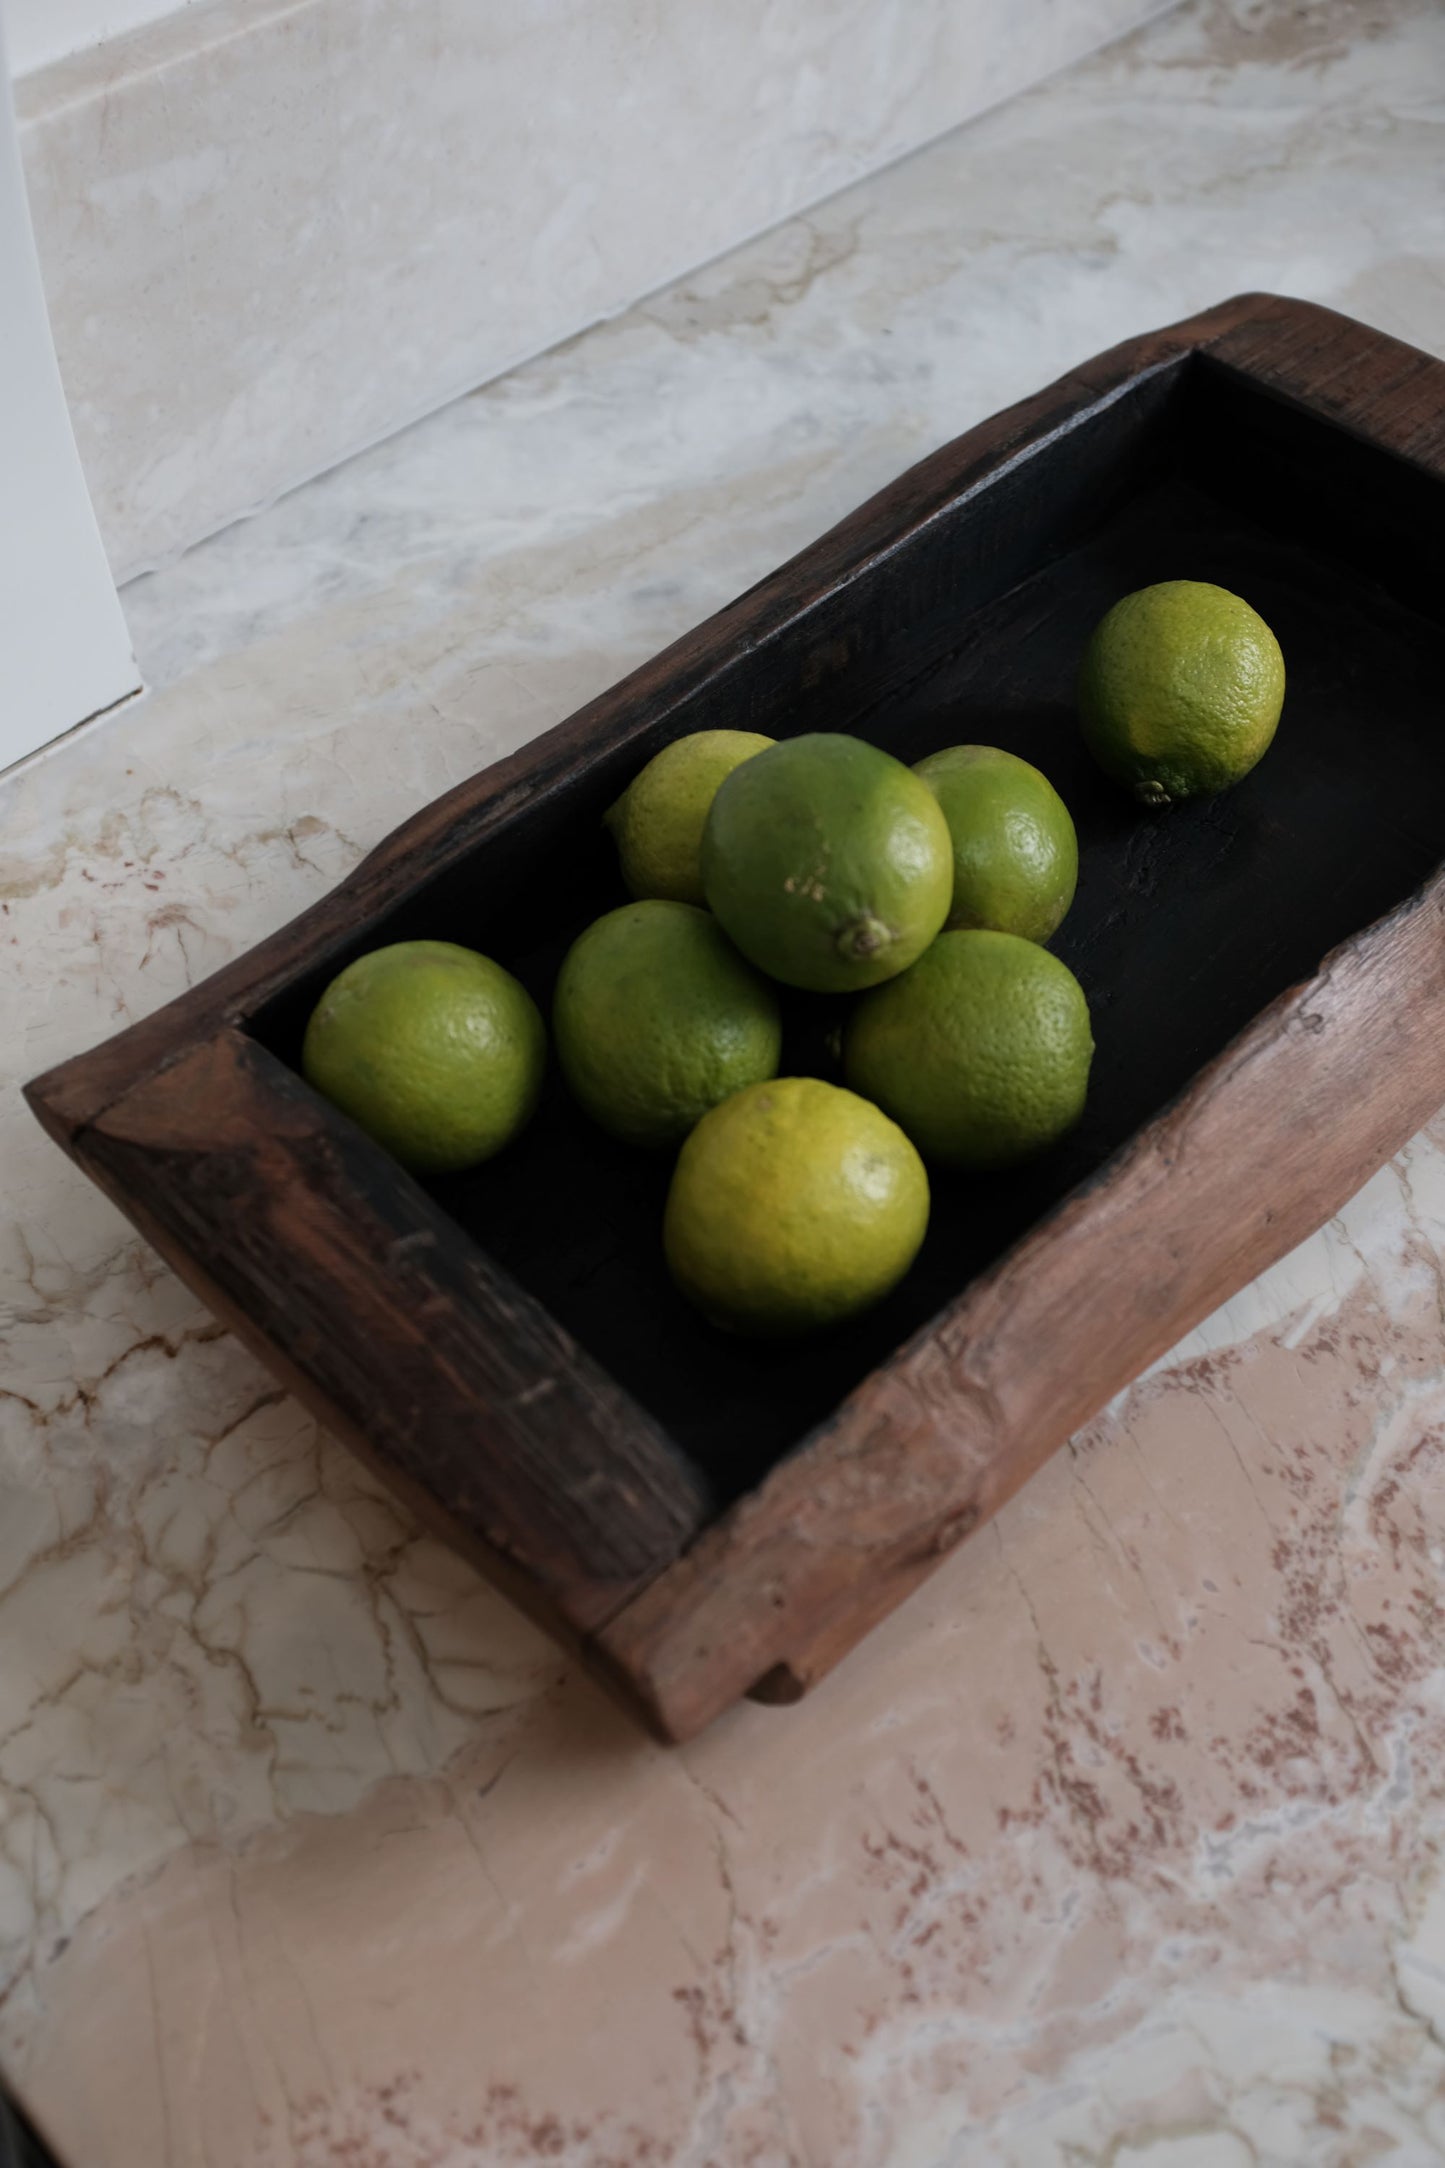 Vintage wooden tray